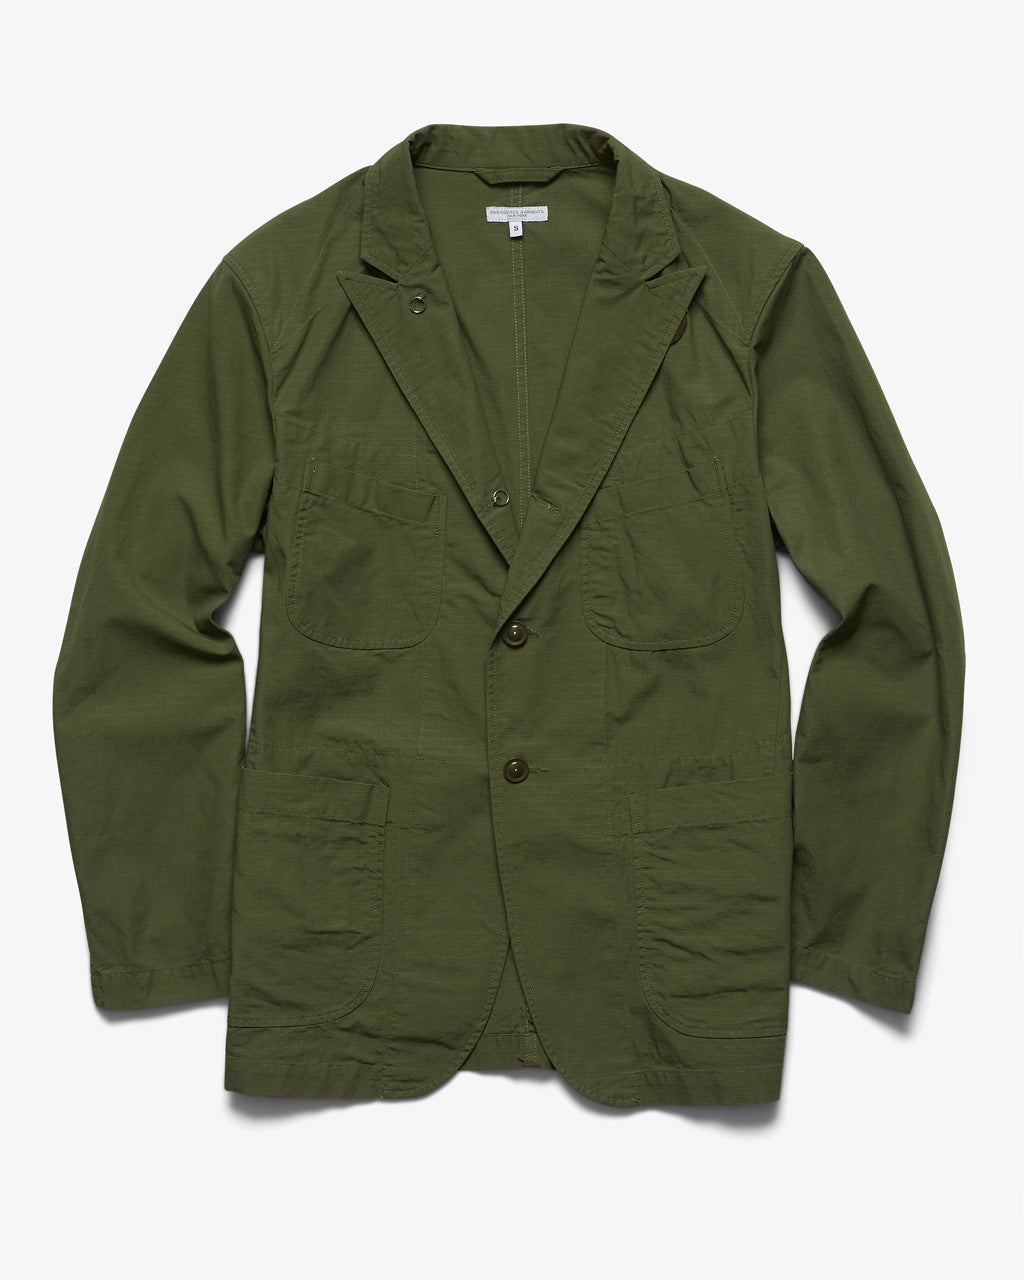 ENGINEERED GARMENTS | BEDFORD JACKET OLIVE COTTON RIPSTOP | Supply ...